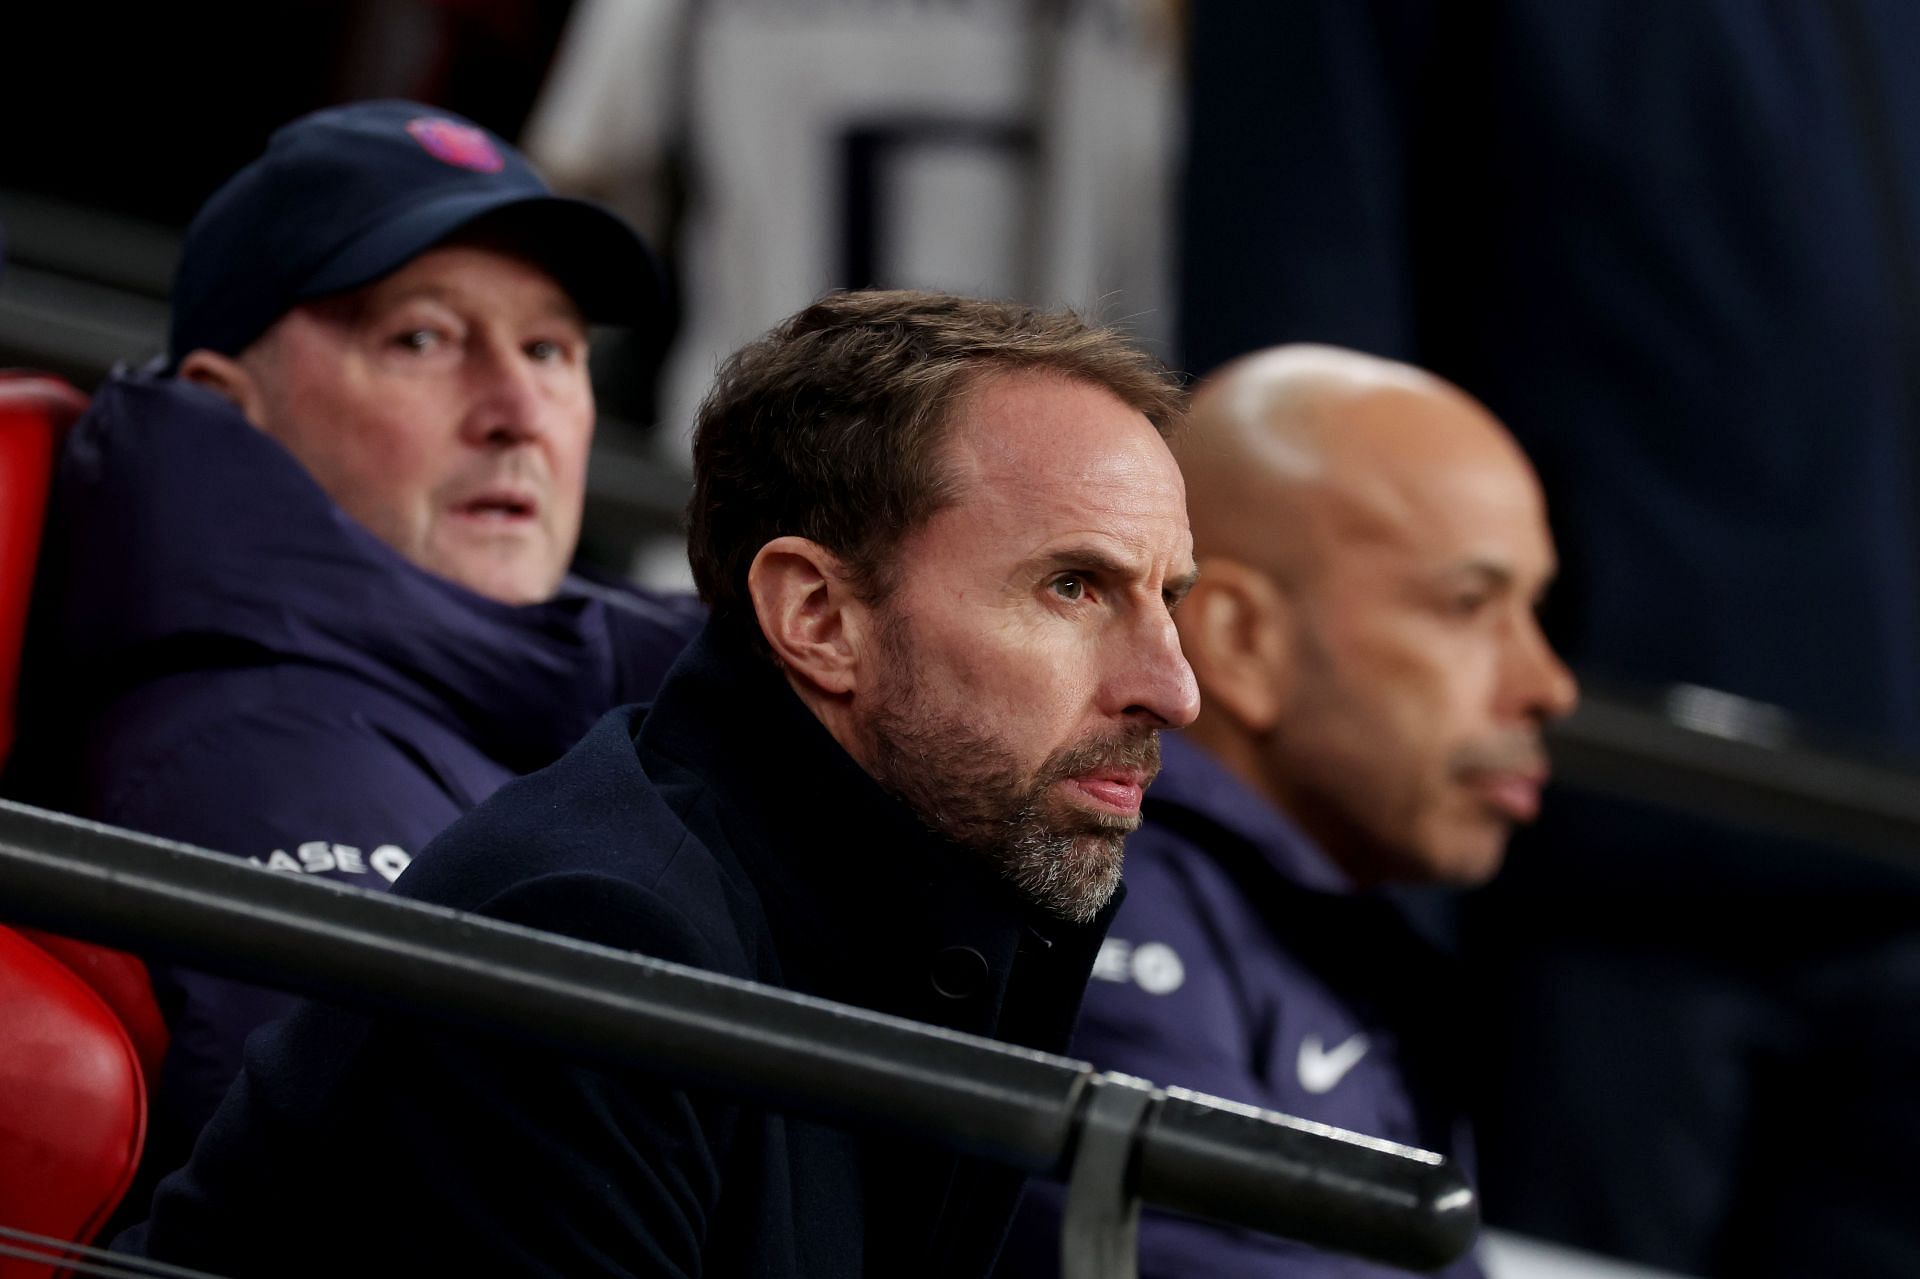 Gareth Southgate is not under consideration at Old Trafford.